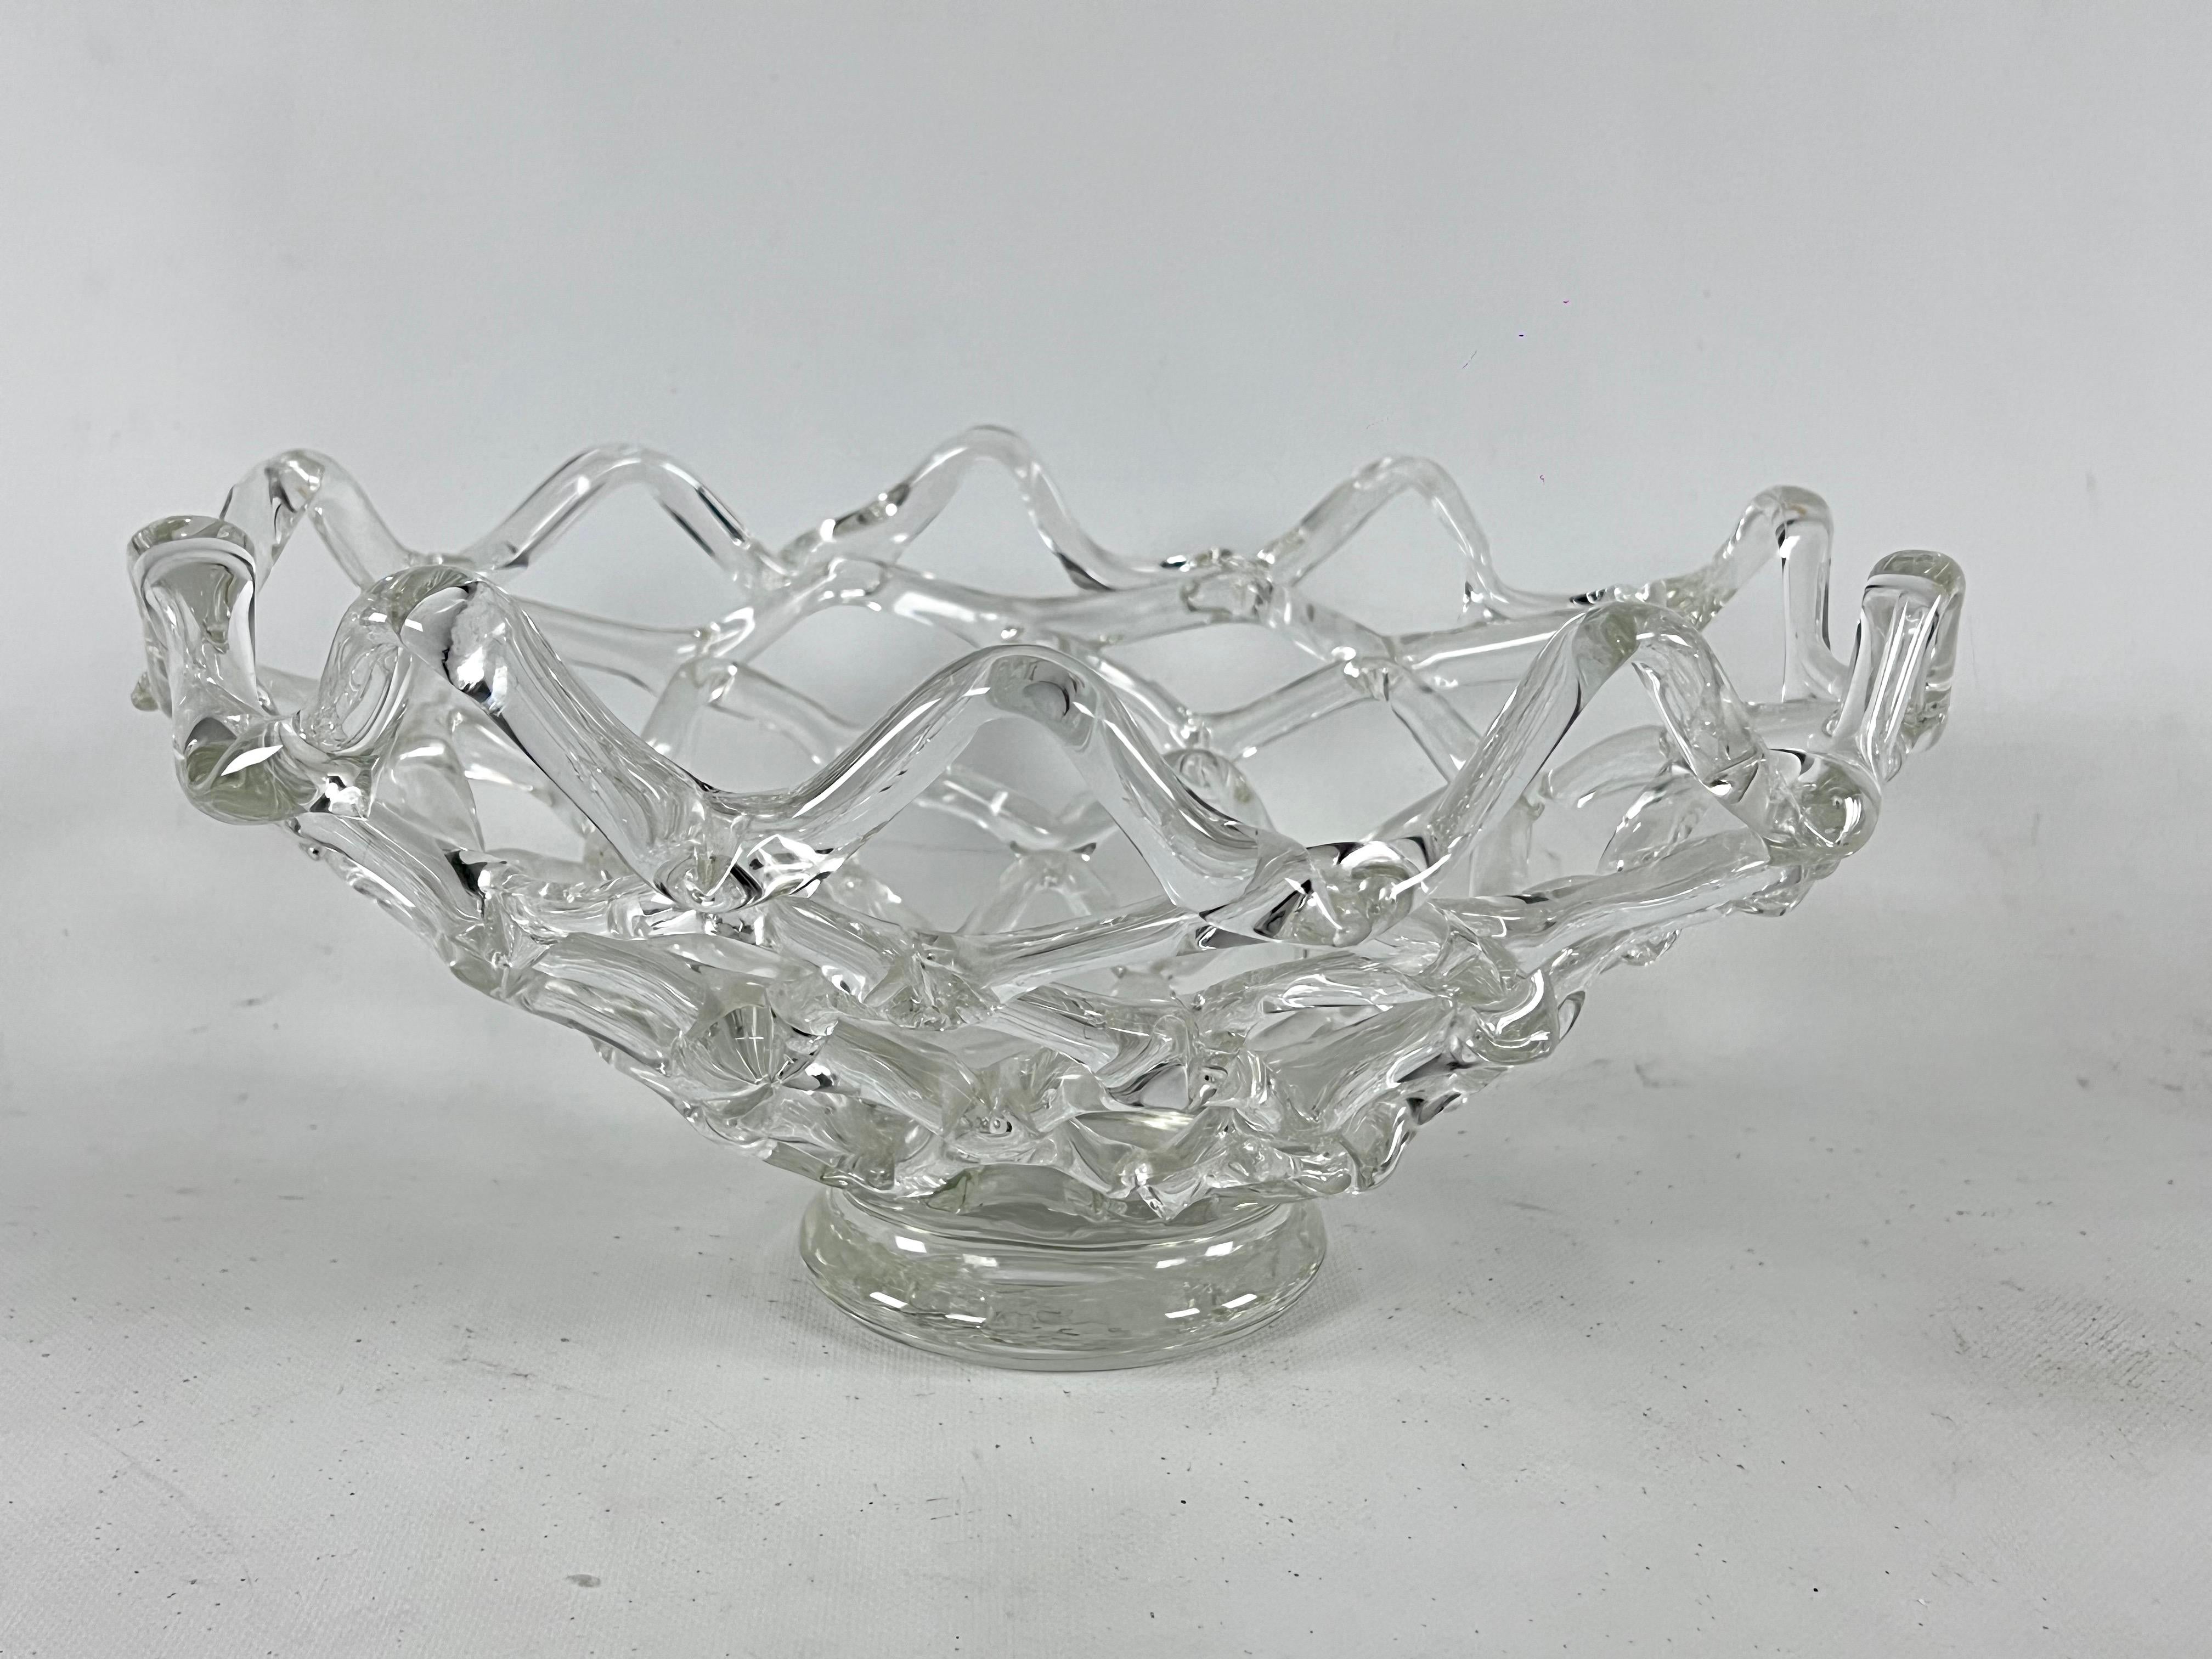 Great vintage condition with normal trace of age and use for this murano intreccio glass centerpiece designed by Ercole Barovier and produced in Italy during the 40s